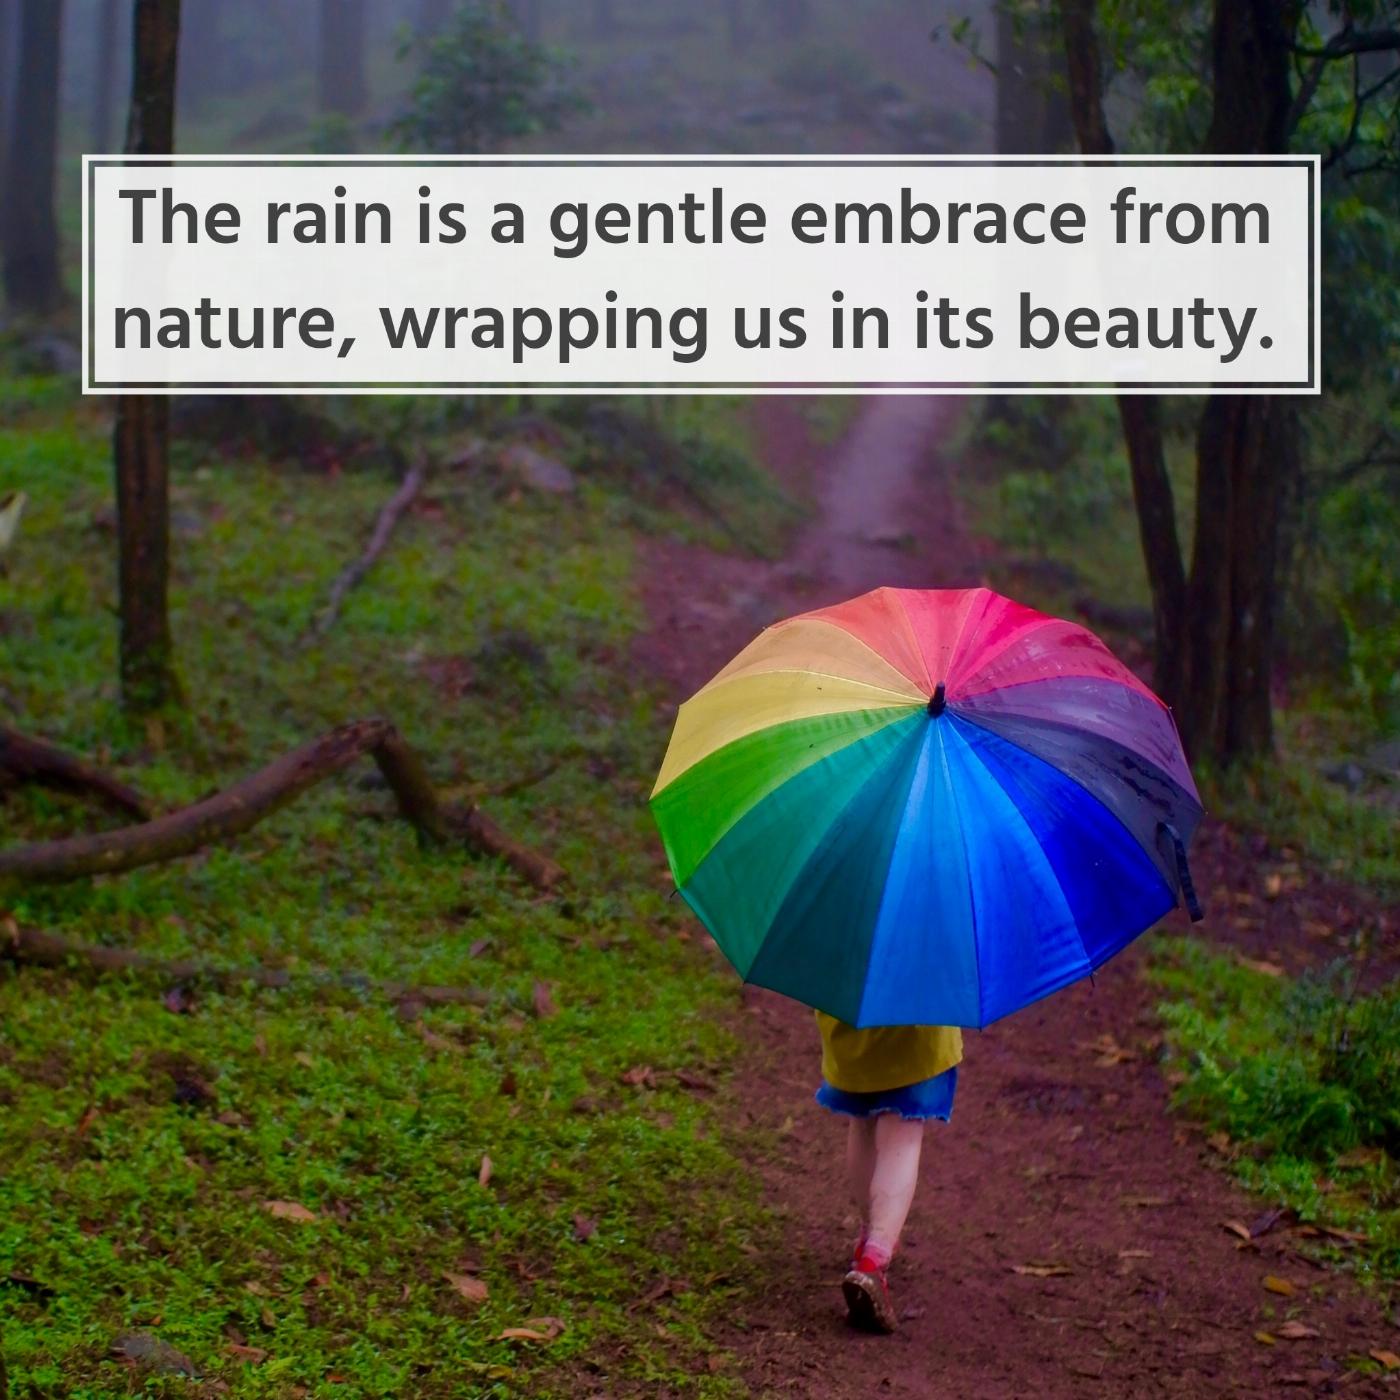 The rain is a gentle embrace from nature wrapping us in its beauty